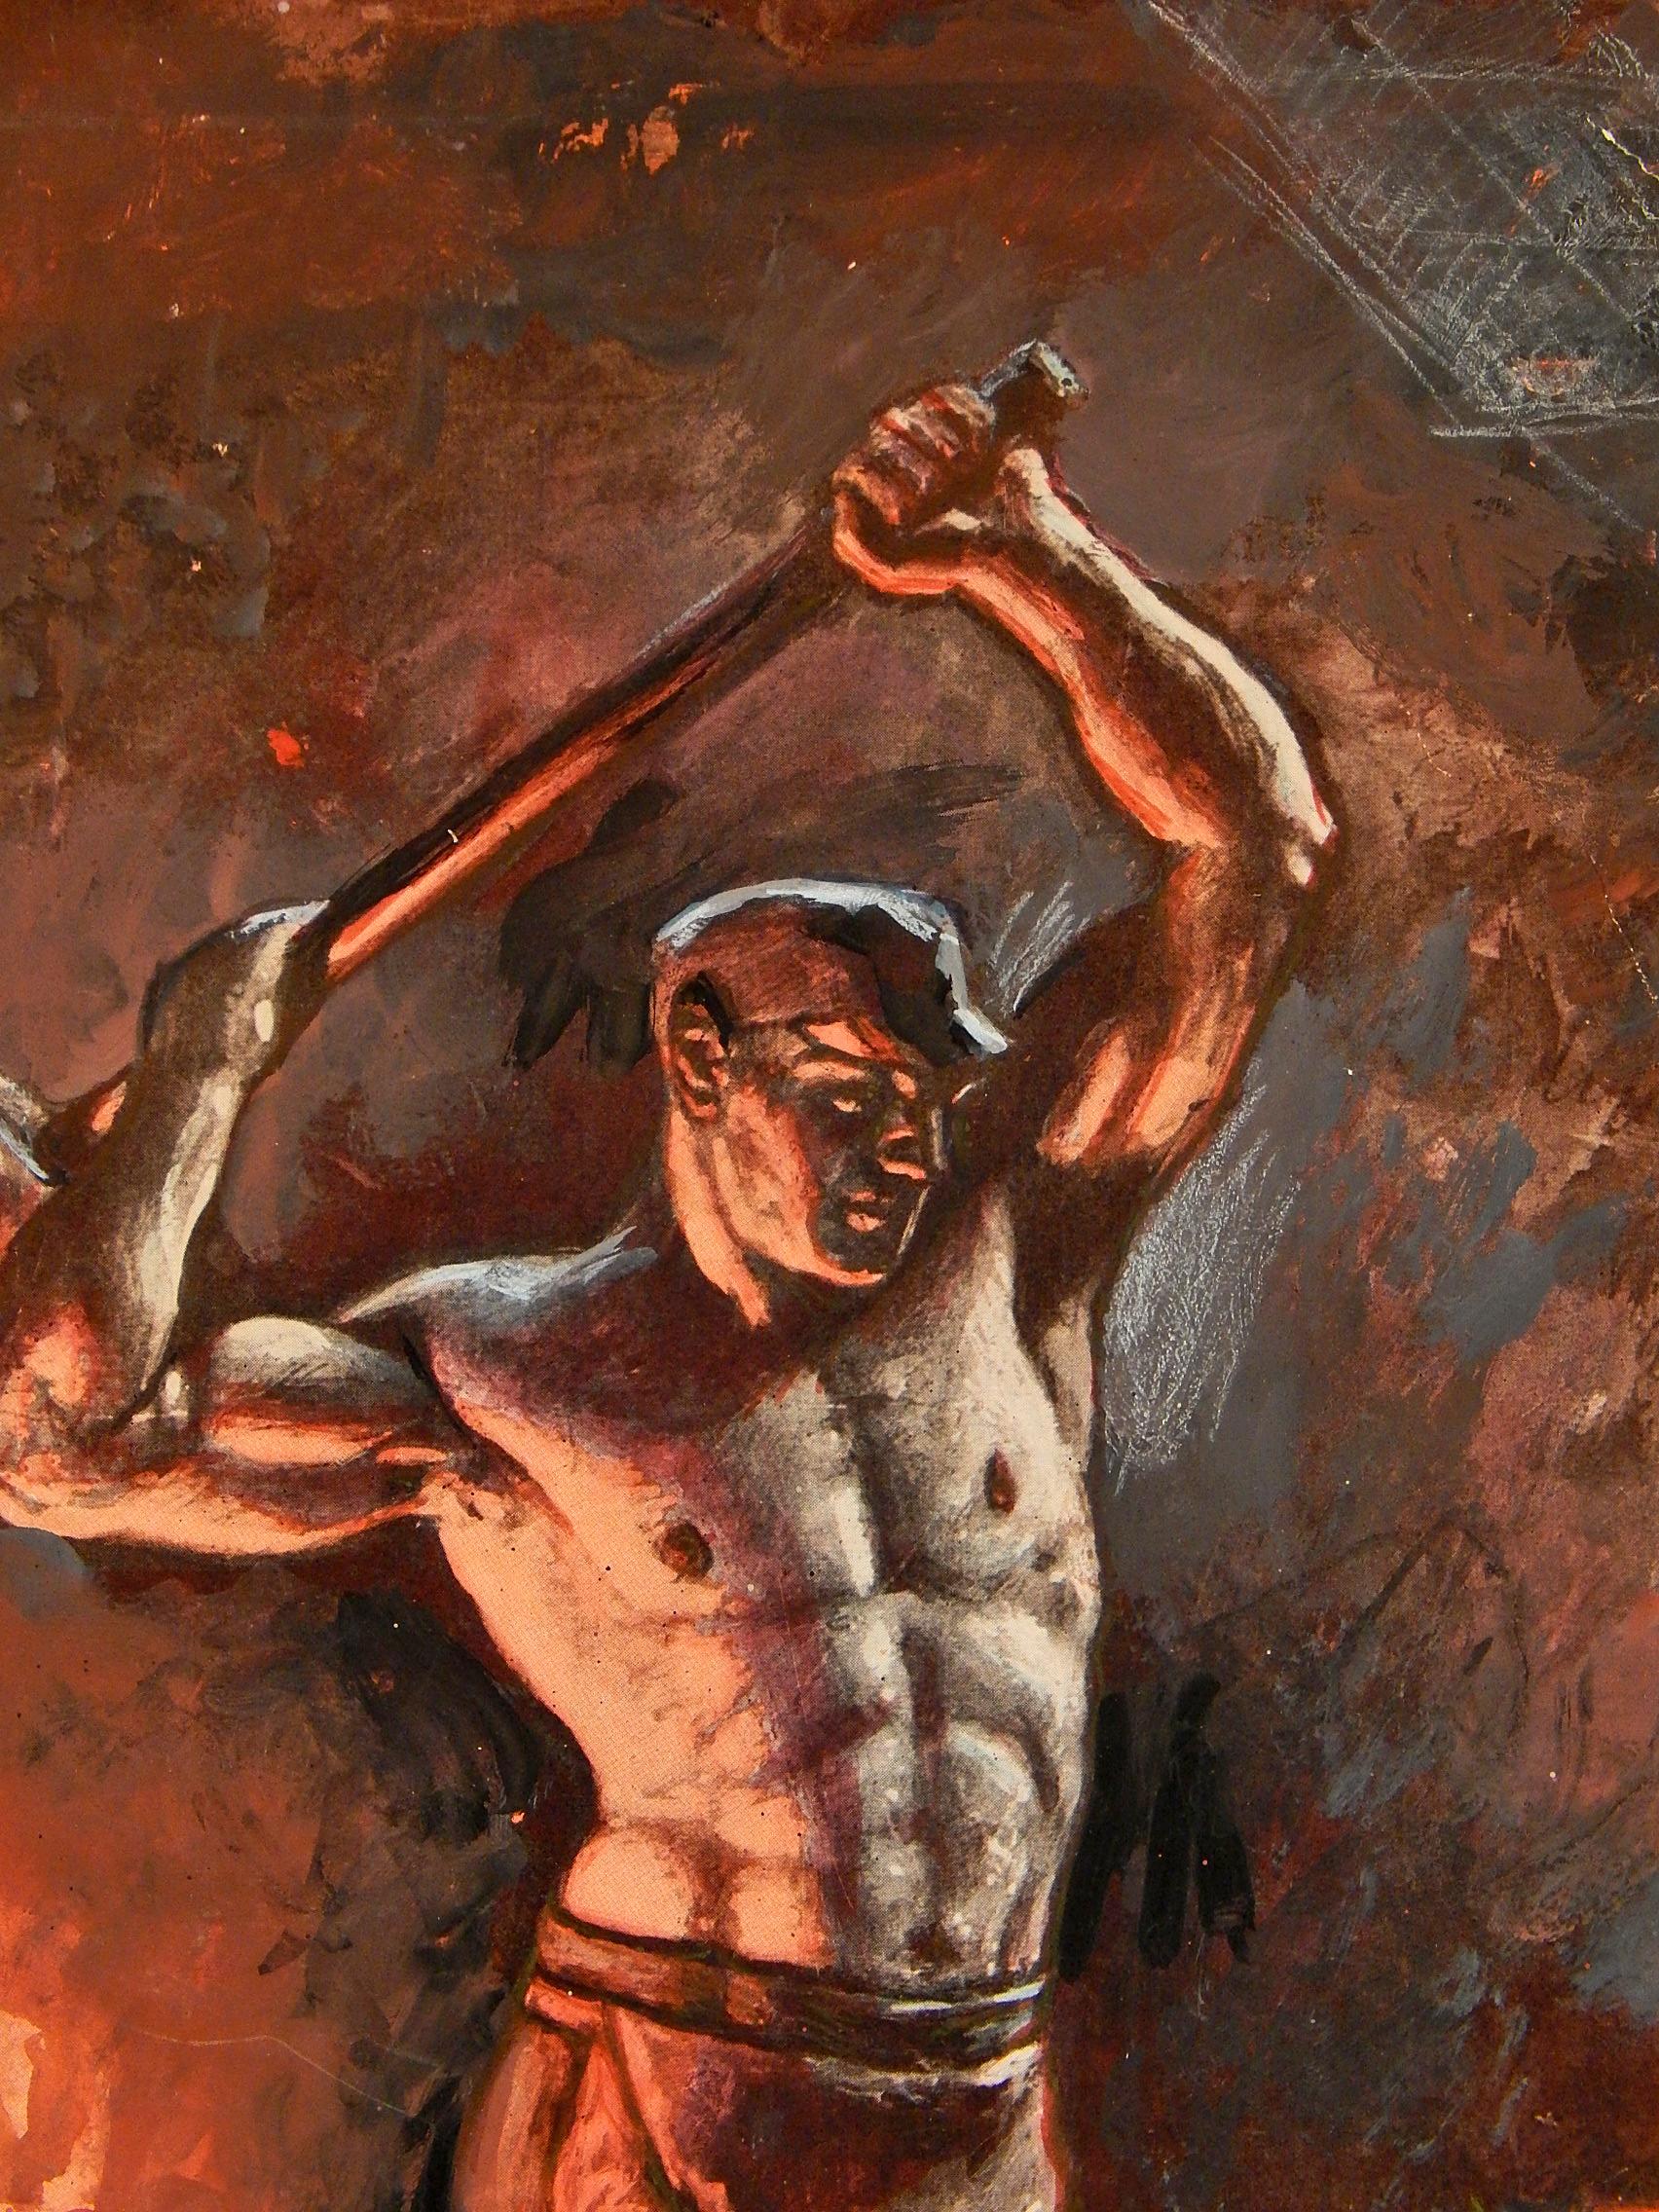 This striking idealization of the American worker, glowing with deep reds and oranges from the molten iron in the scene, is a sketch by John Garth for an oil painting he executed in 1925, one of several by the artist that depicted industrial workers